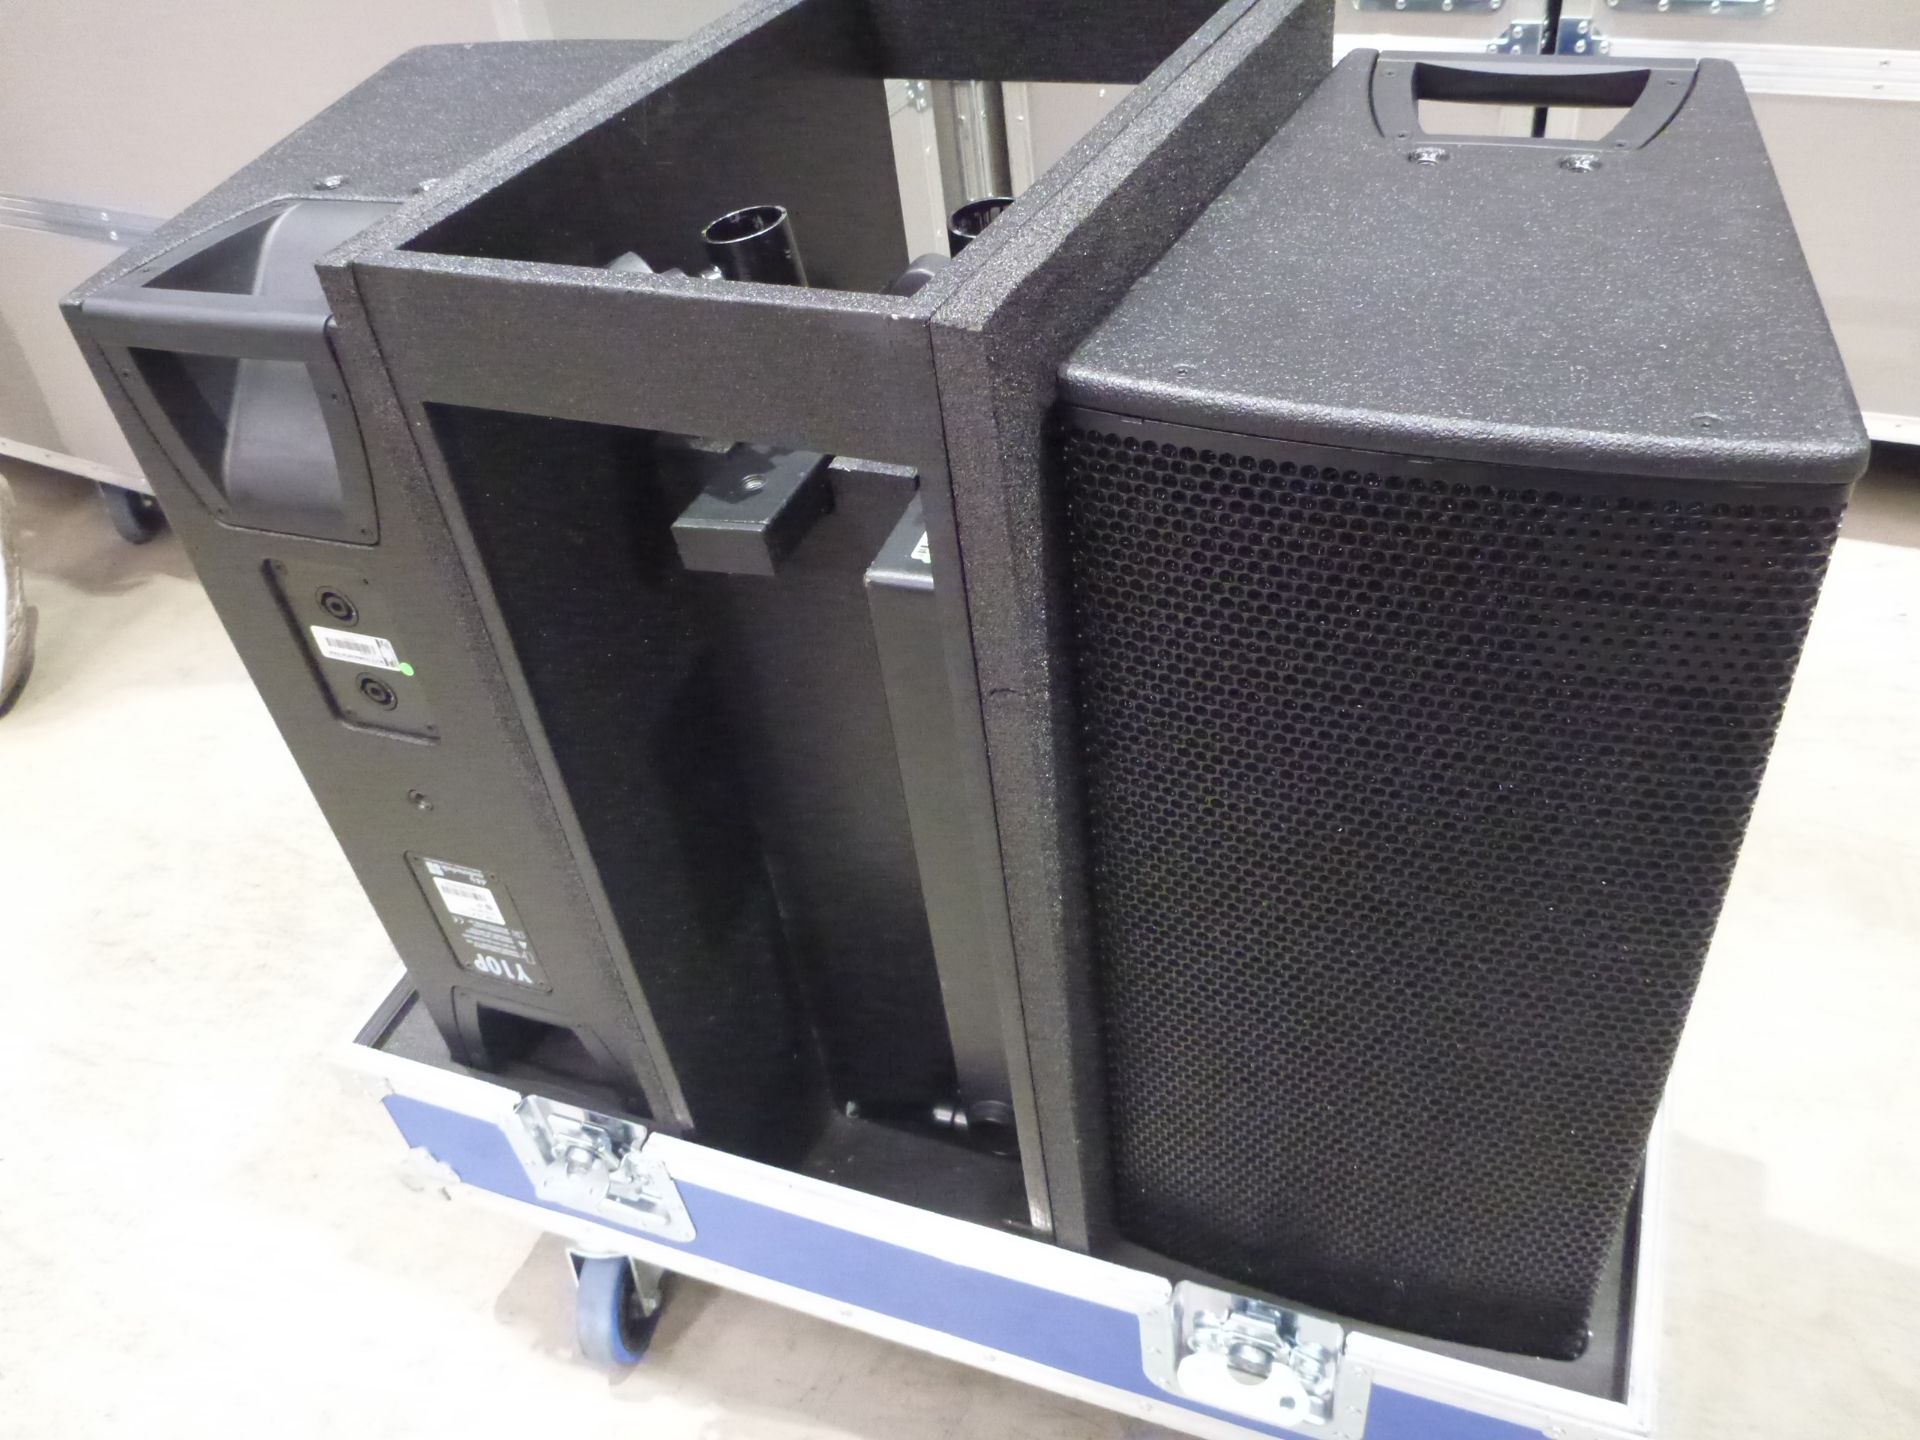 D & B Audiotecknik Y10P Loudspeakers (Pair) In flight case with flying frame, top hat and safety - Image 5 of 8